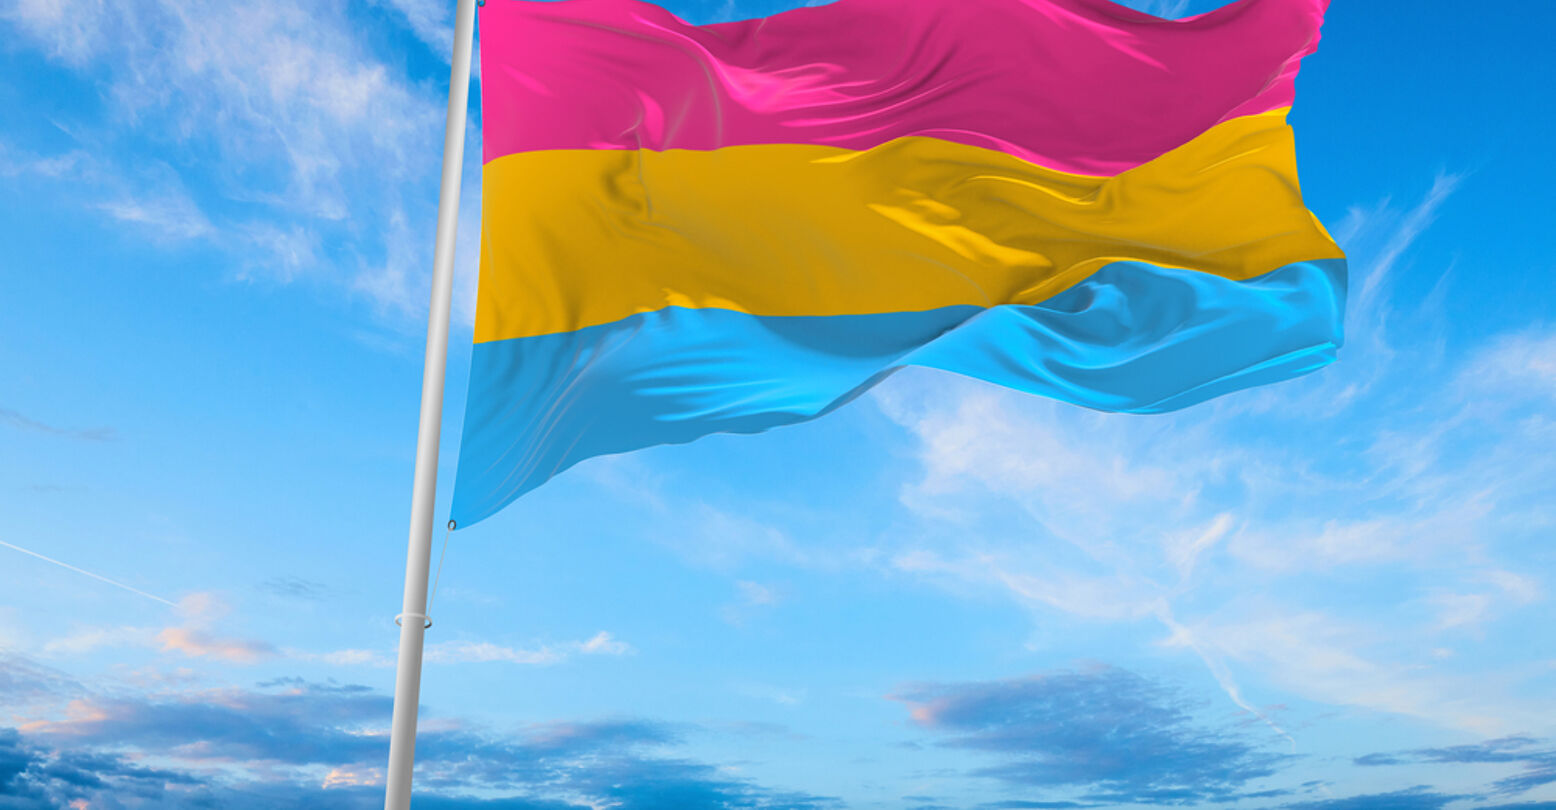 Pansexuality Pride flag waving in the wind on flagpole against the sky